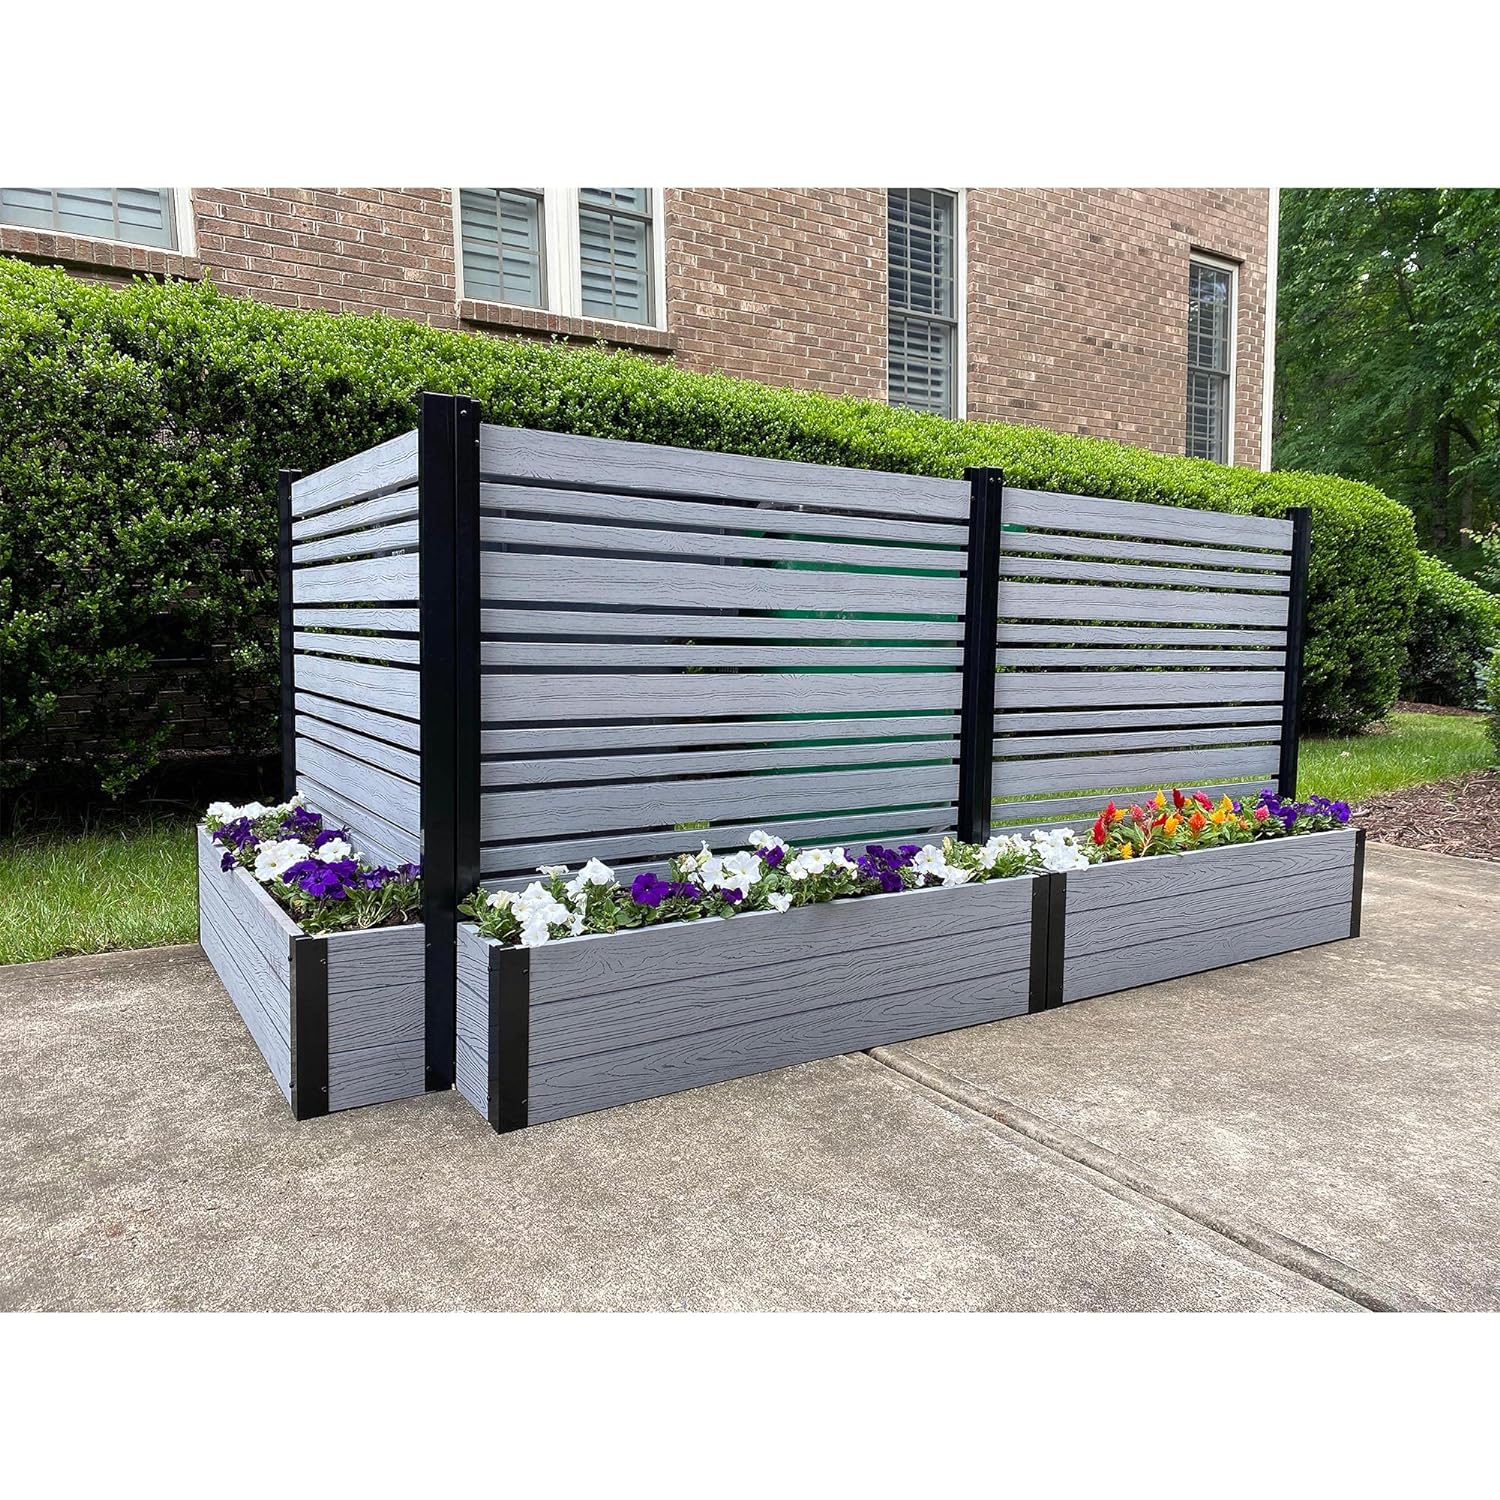 TKM Home Ec18007 4Ft H X 4Ft W X 1Ft L Florence Freestanding Woodtek Ash Color Vinyl Privacy Fence Screen And Planter Box Kit